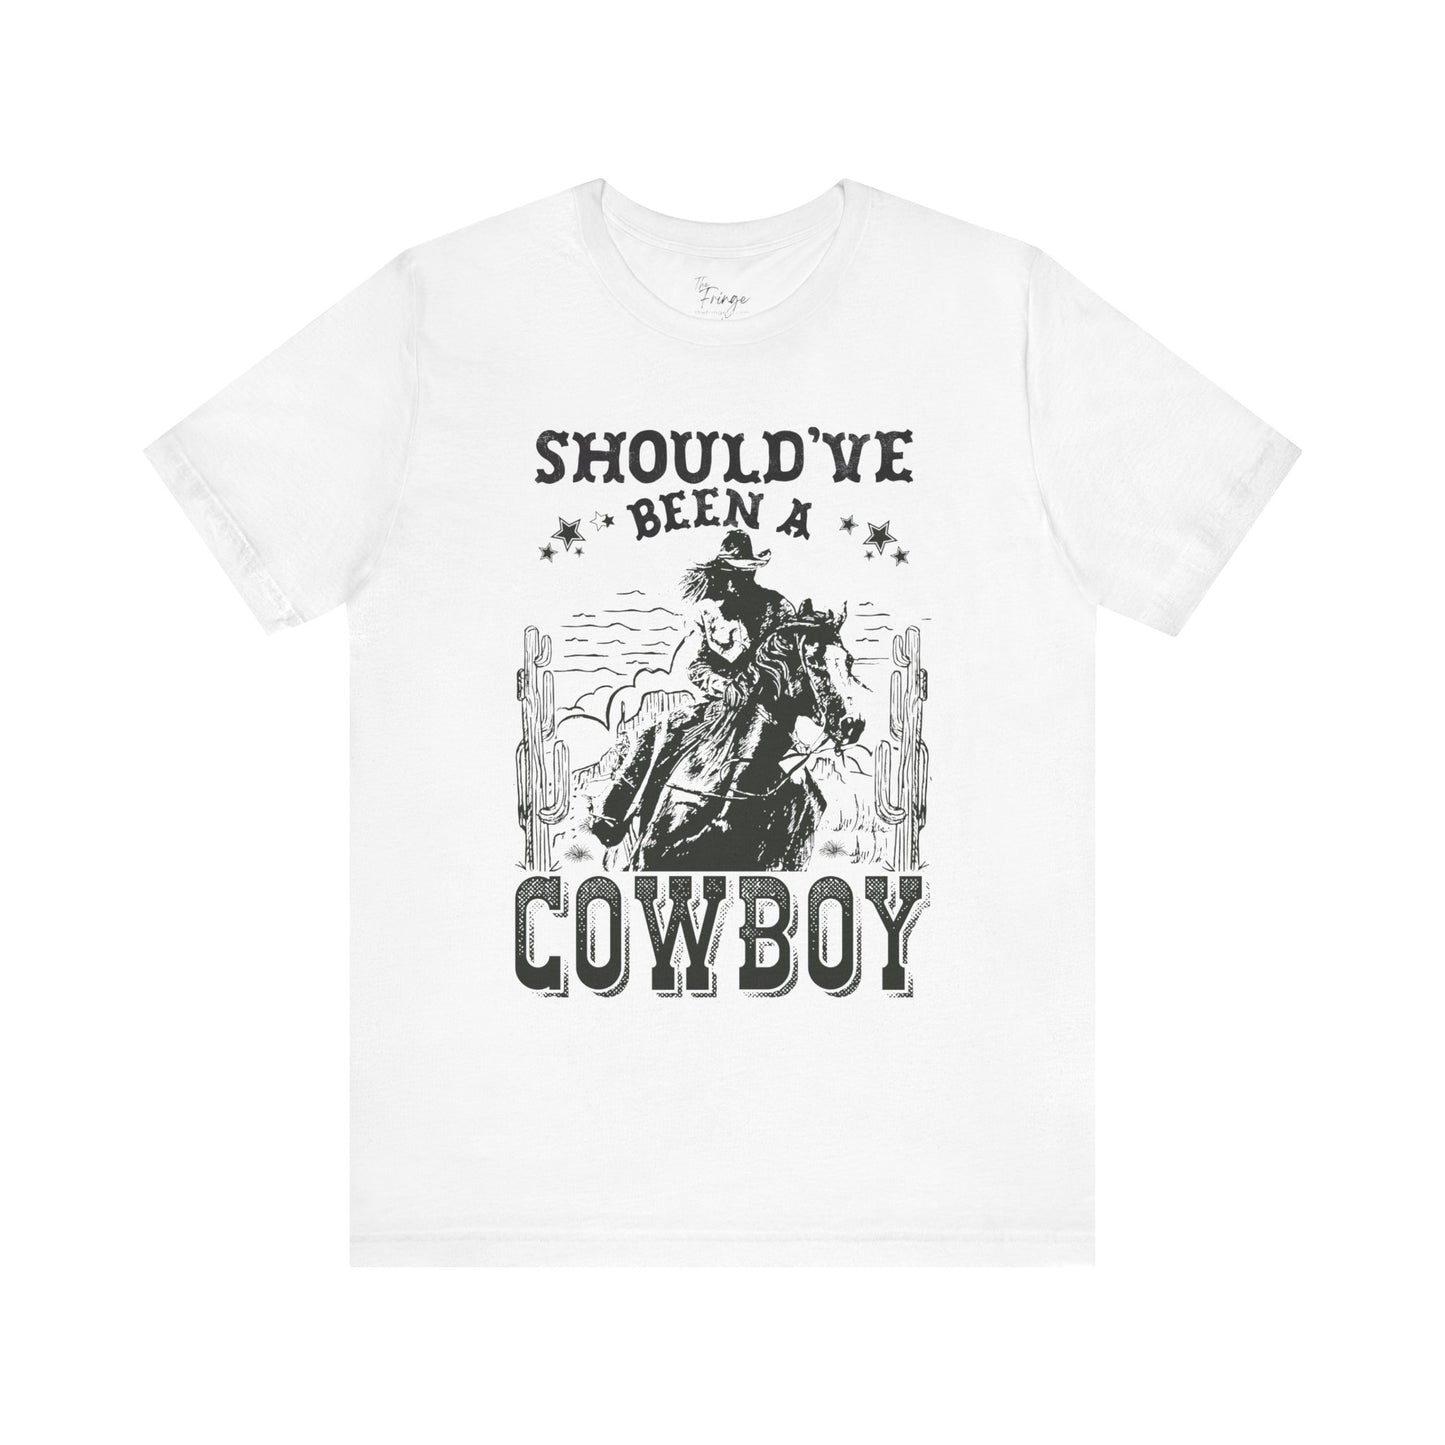 Should've Been a Cowboy Graphic Tee | Women's Western T-shirts | Country Tees